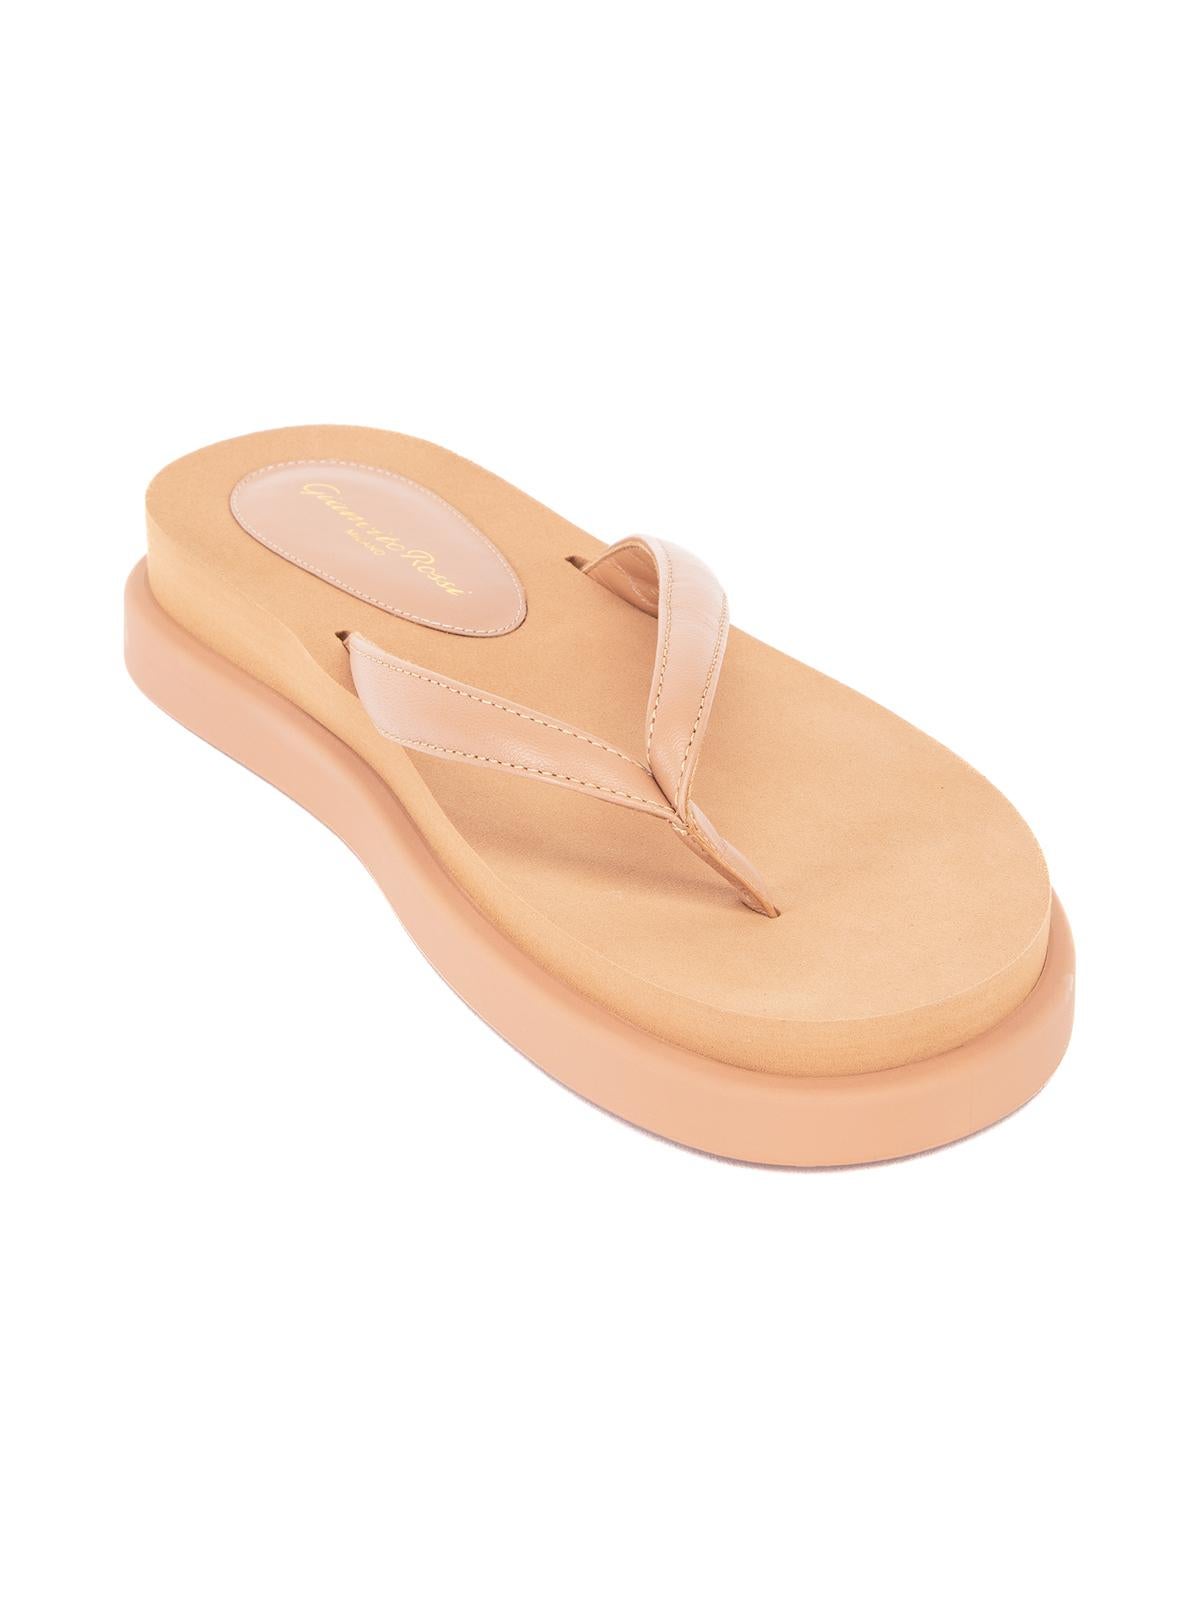 CONDITION is Never Worn. No visible wear to flip flops is evident on this used Gianvito Rossi designer resale item. Details Beige Leather Thong flip flops Flatform Made in Italy Composition Leather, Rubber Size & Fit Heel Height 4cm/2in Size: EU 40